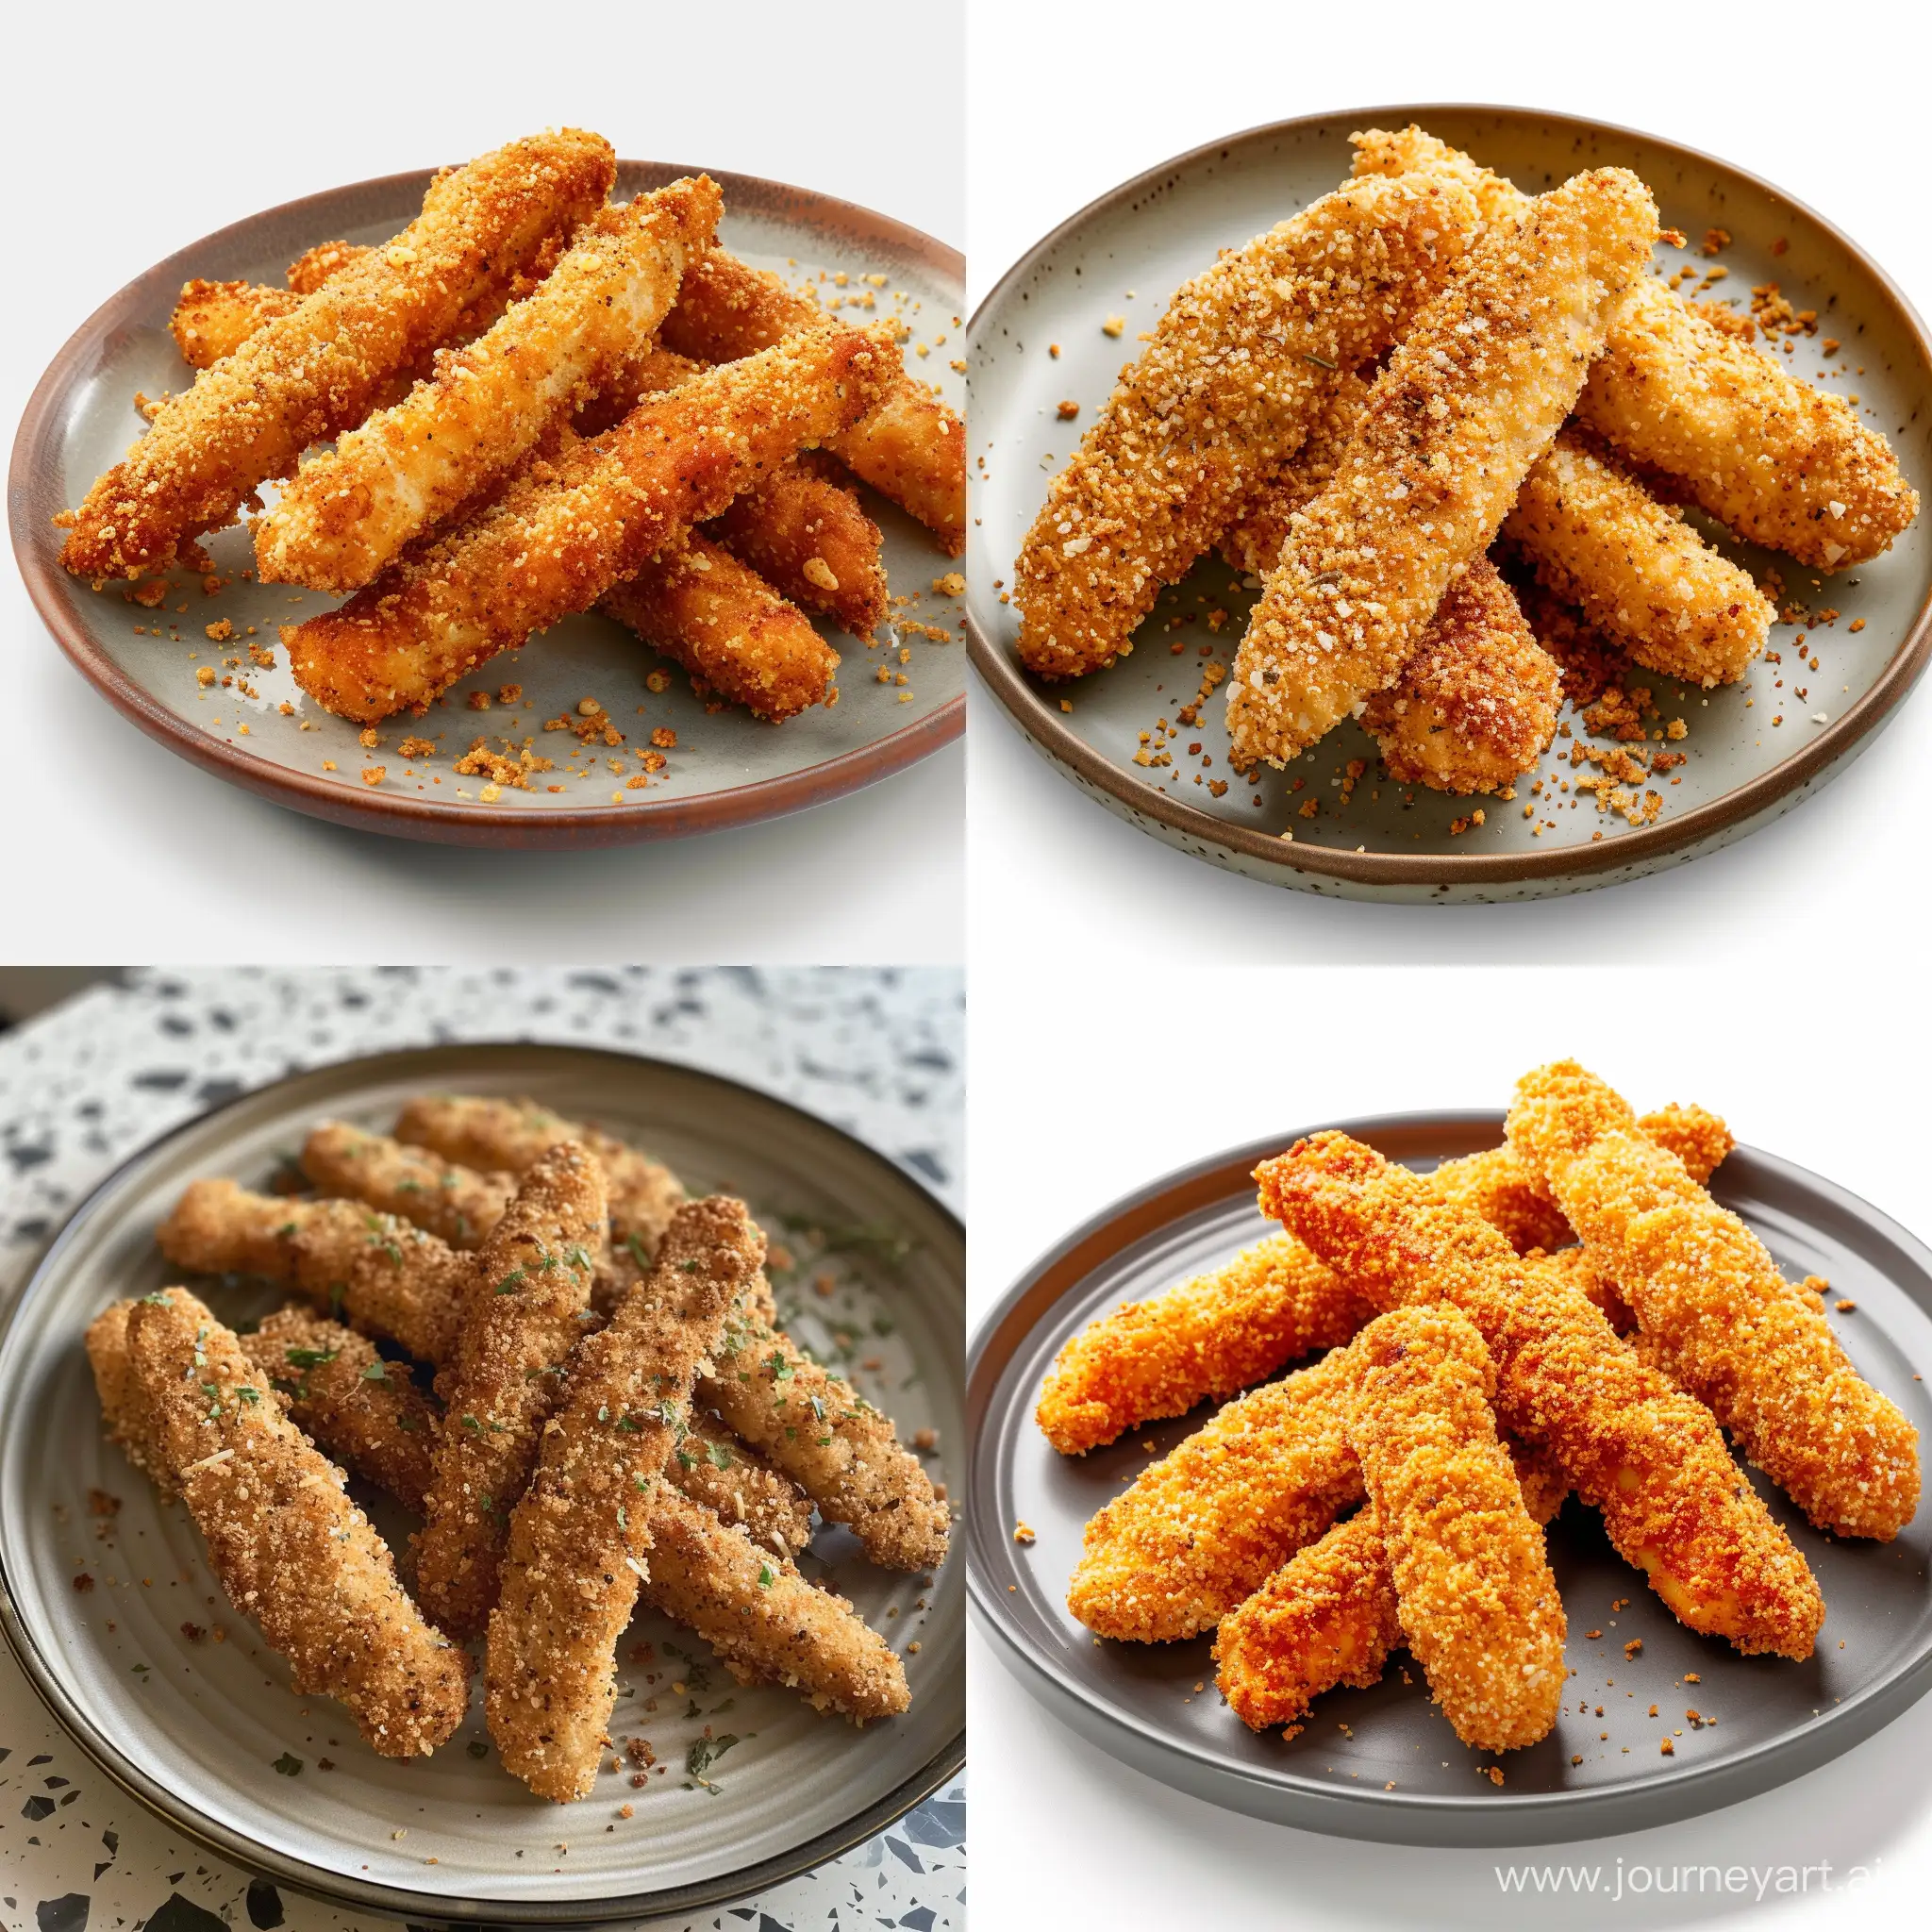 Golden-Crispy-Chicken-Sticks-on-Plate-Professional-Photography-Perspective